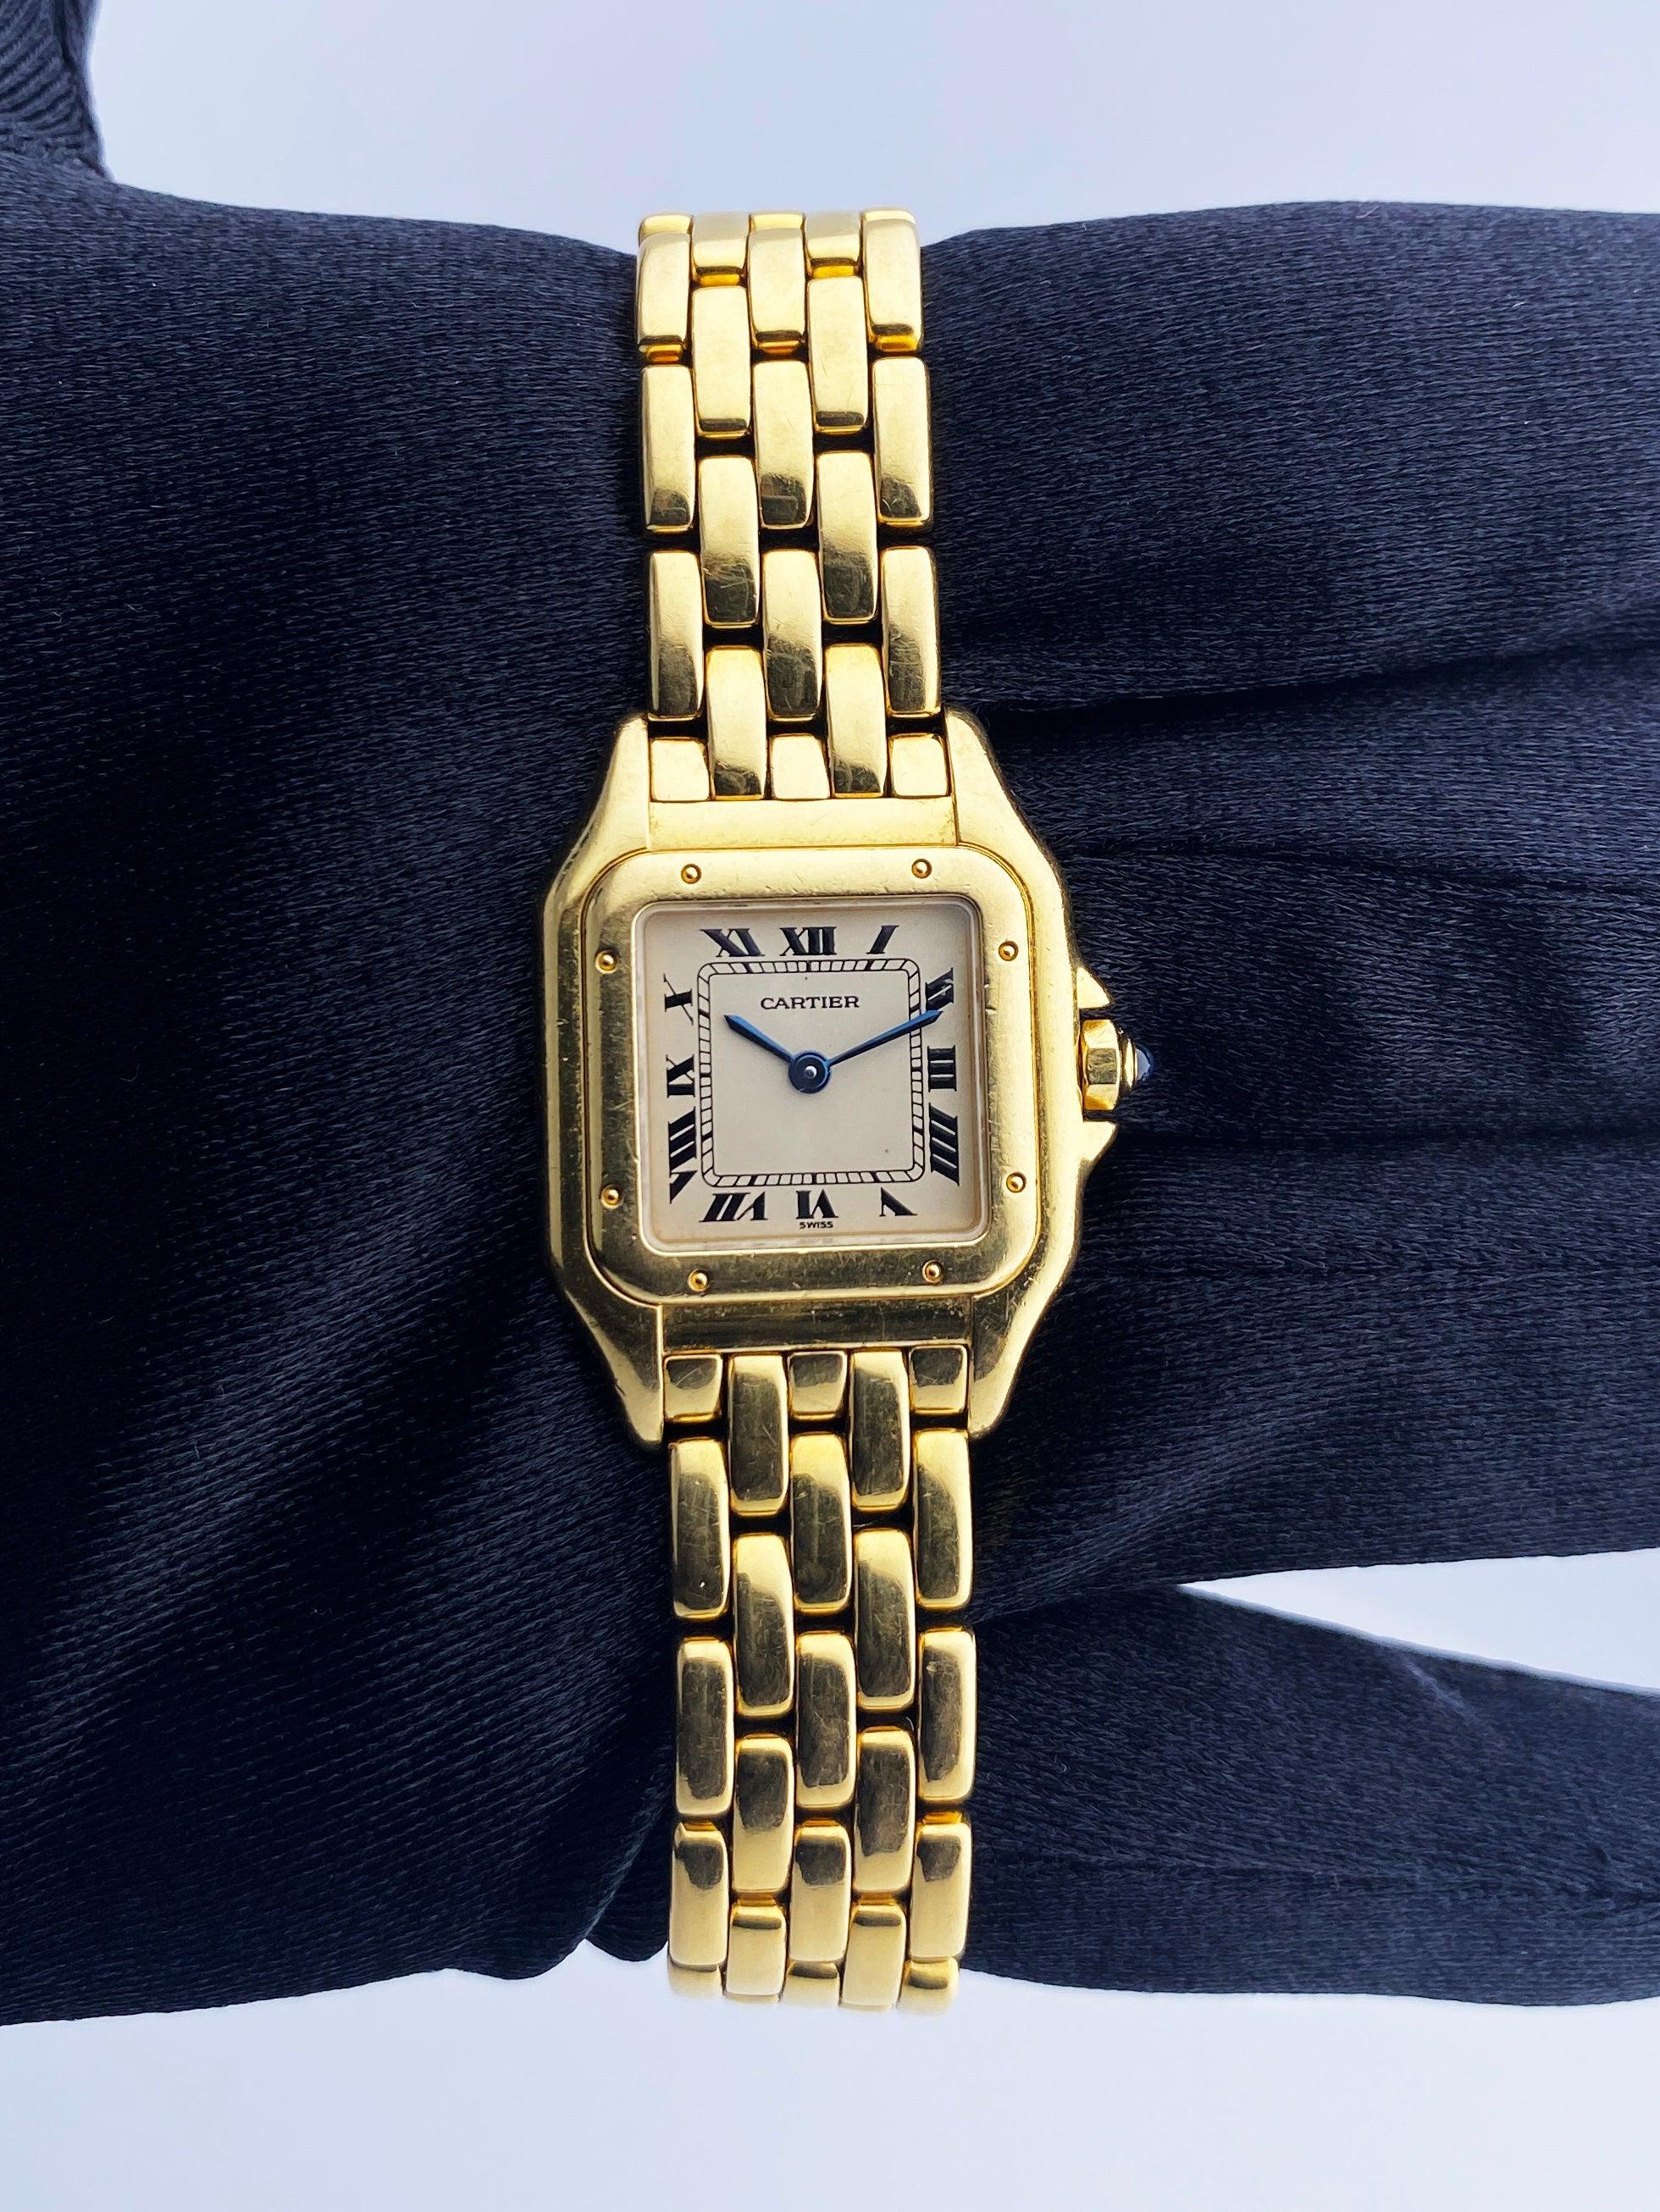 Cartier Panthere Ladies Watch. 22mm 18K yellow gold case. 18K yellow gold smooth bezel. Off-White dial with blue steel hands and Roman numeral hour markers. Minute markers on the inner dial. 18K yellow gold bracelet with hidden butterfly clasp. Will